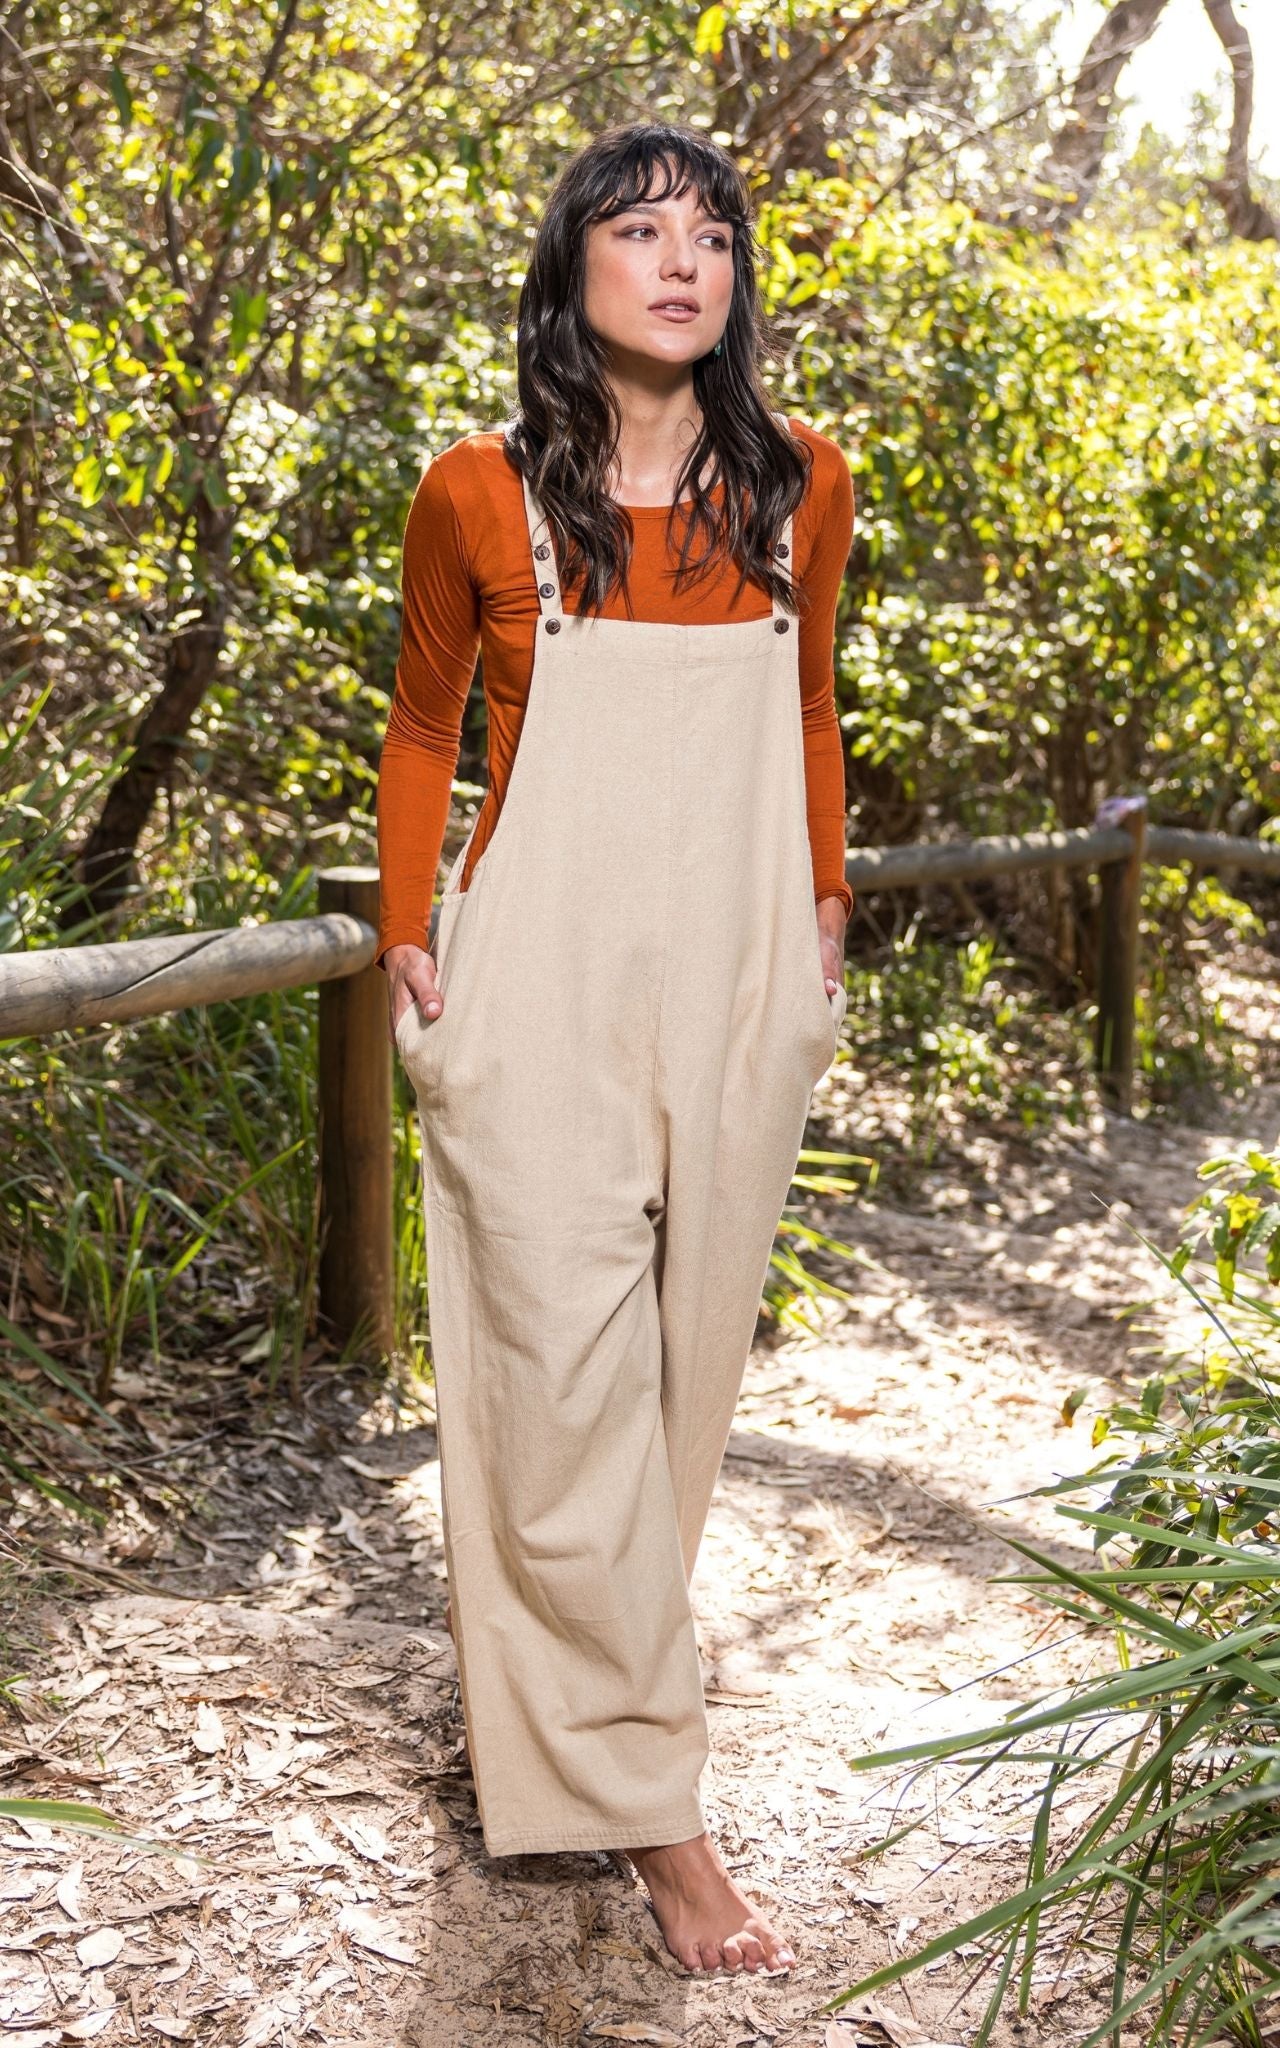 Surya Australia Ethical Cotton 'Juanita' Overalls Dungarees made in Nepal - Oatmeal